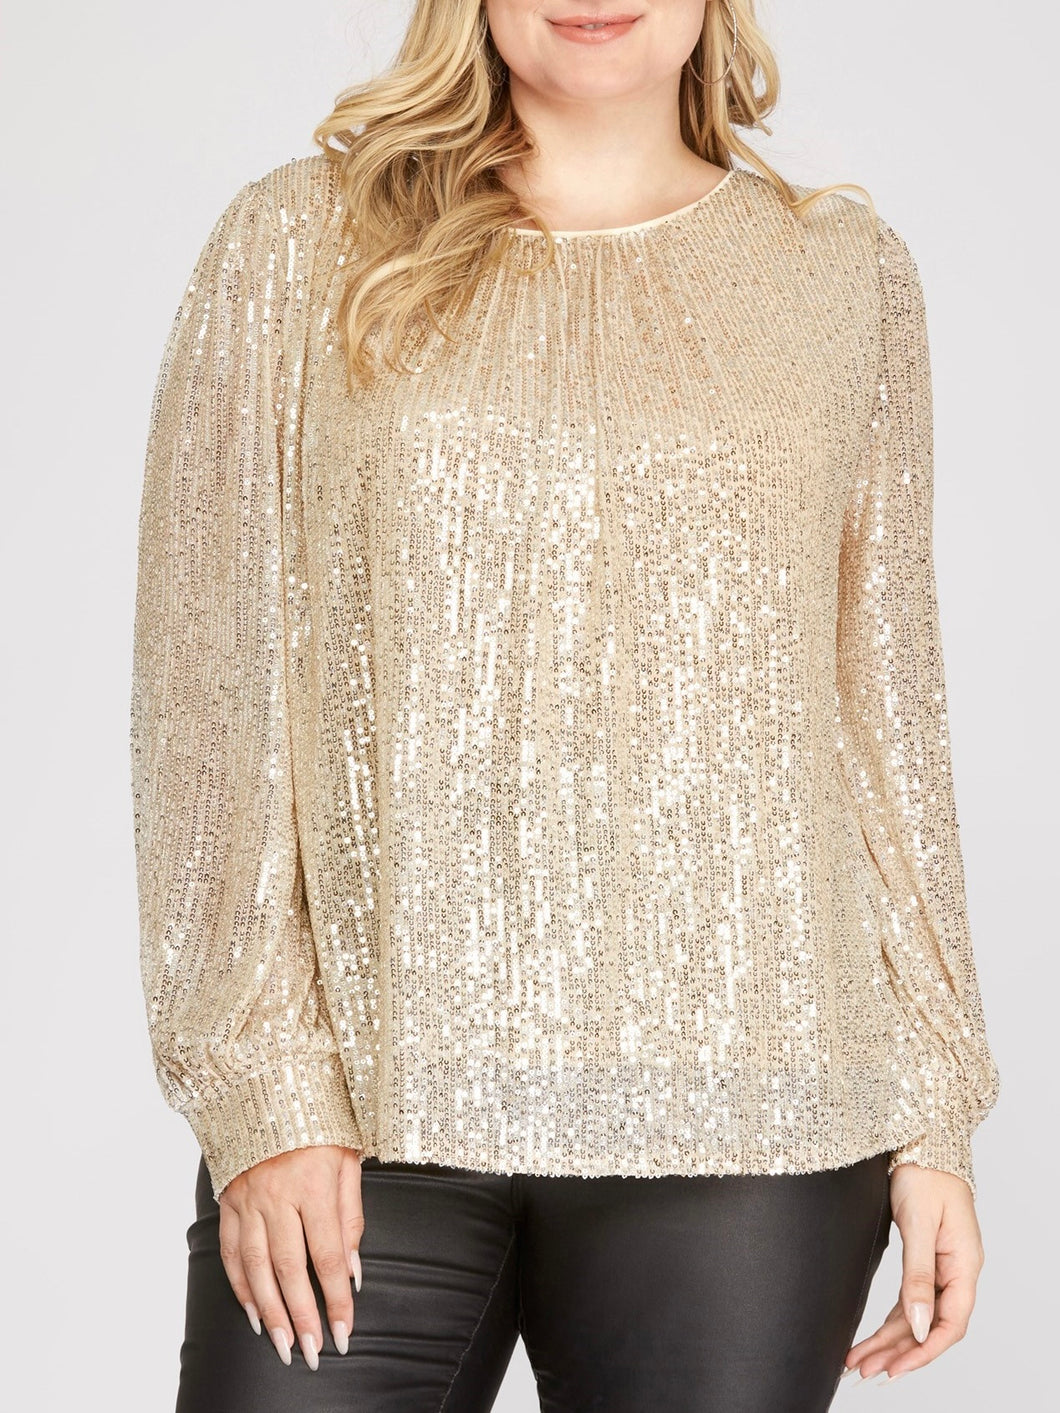 Sequin Long Sleeve Puff Sleeve Top - Ivory FINAL SALE